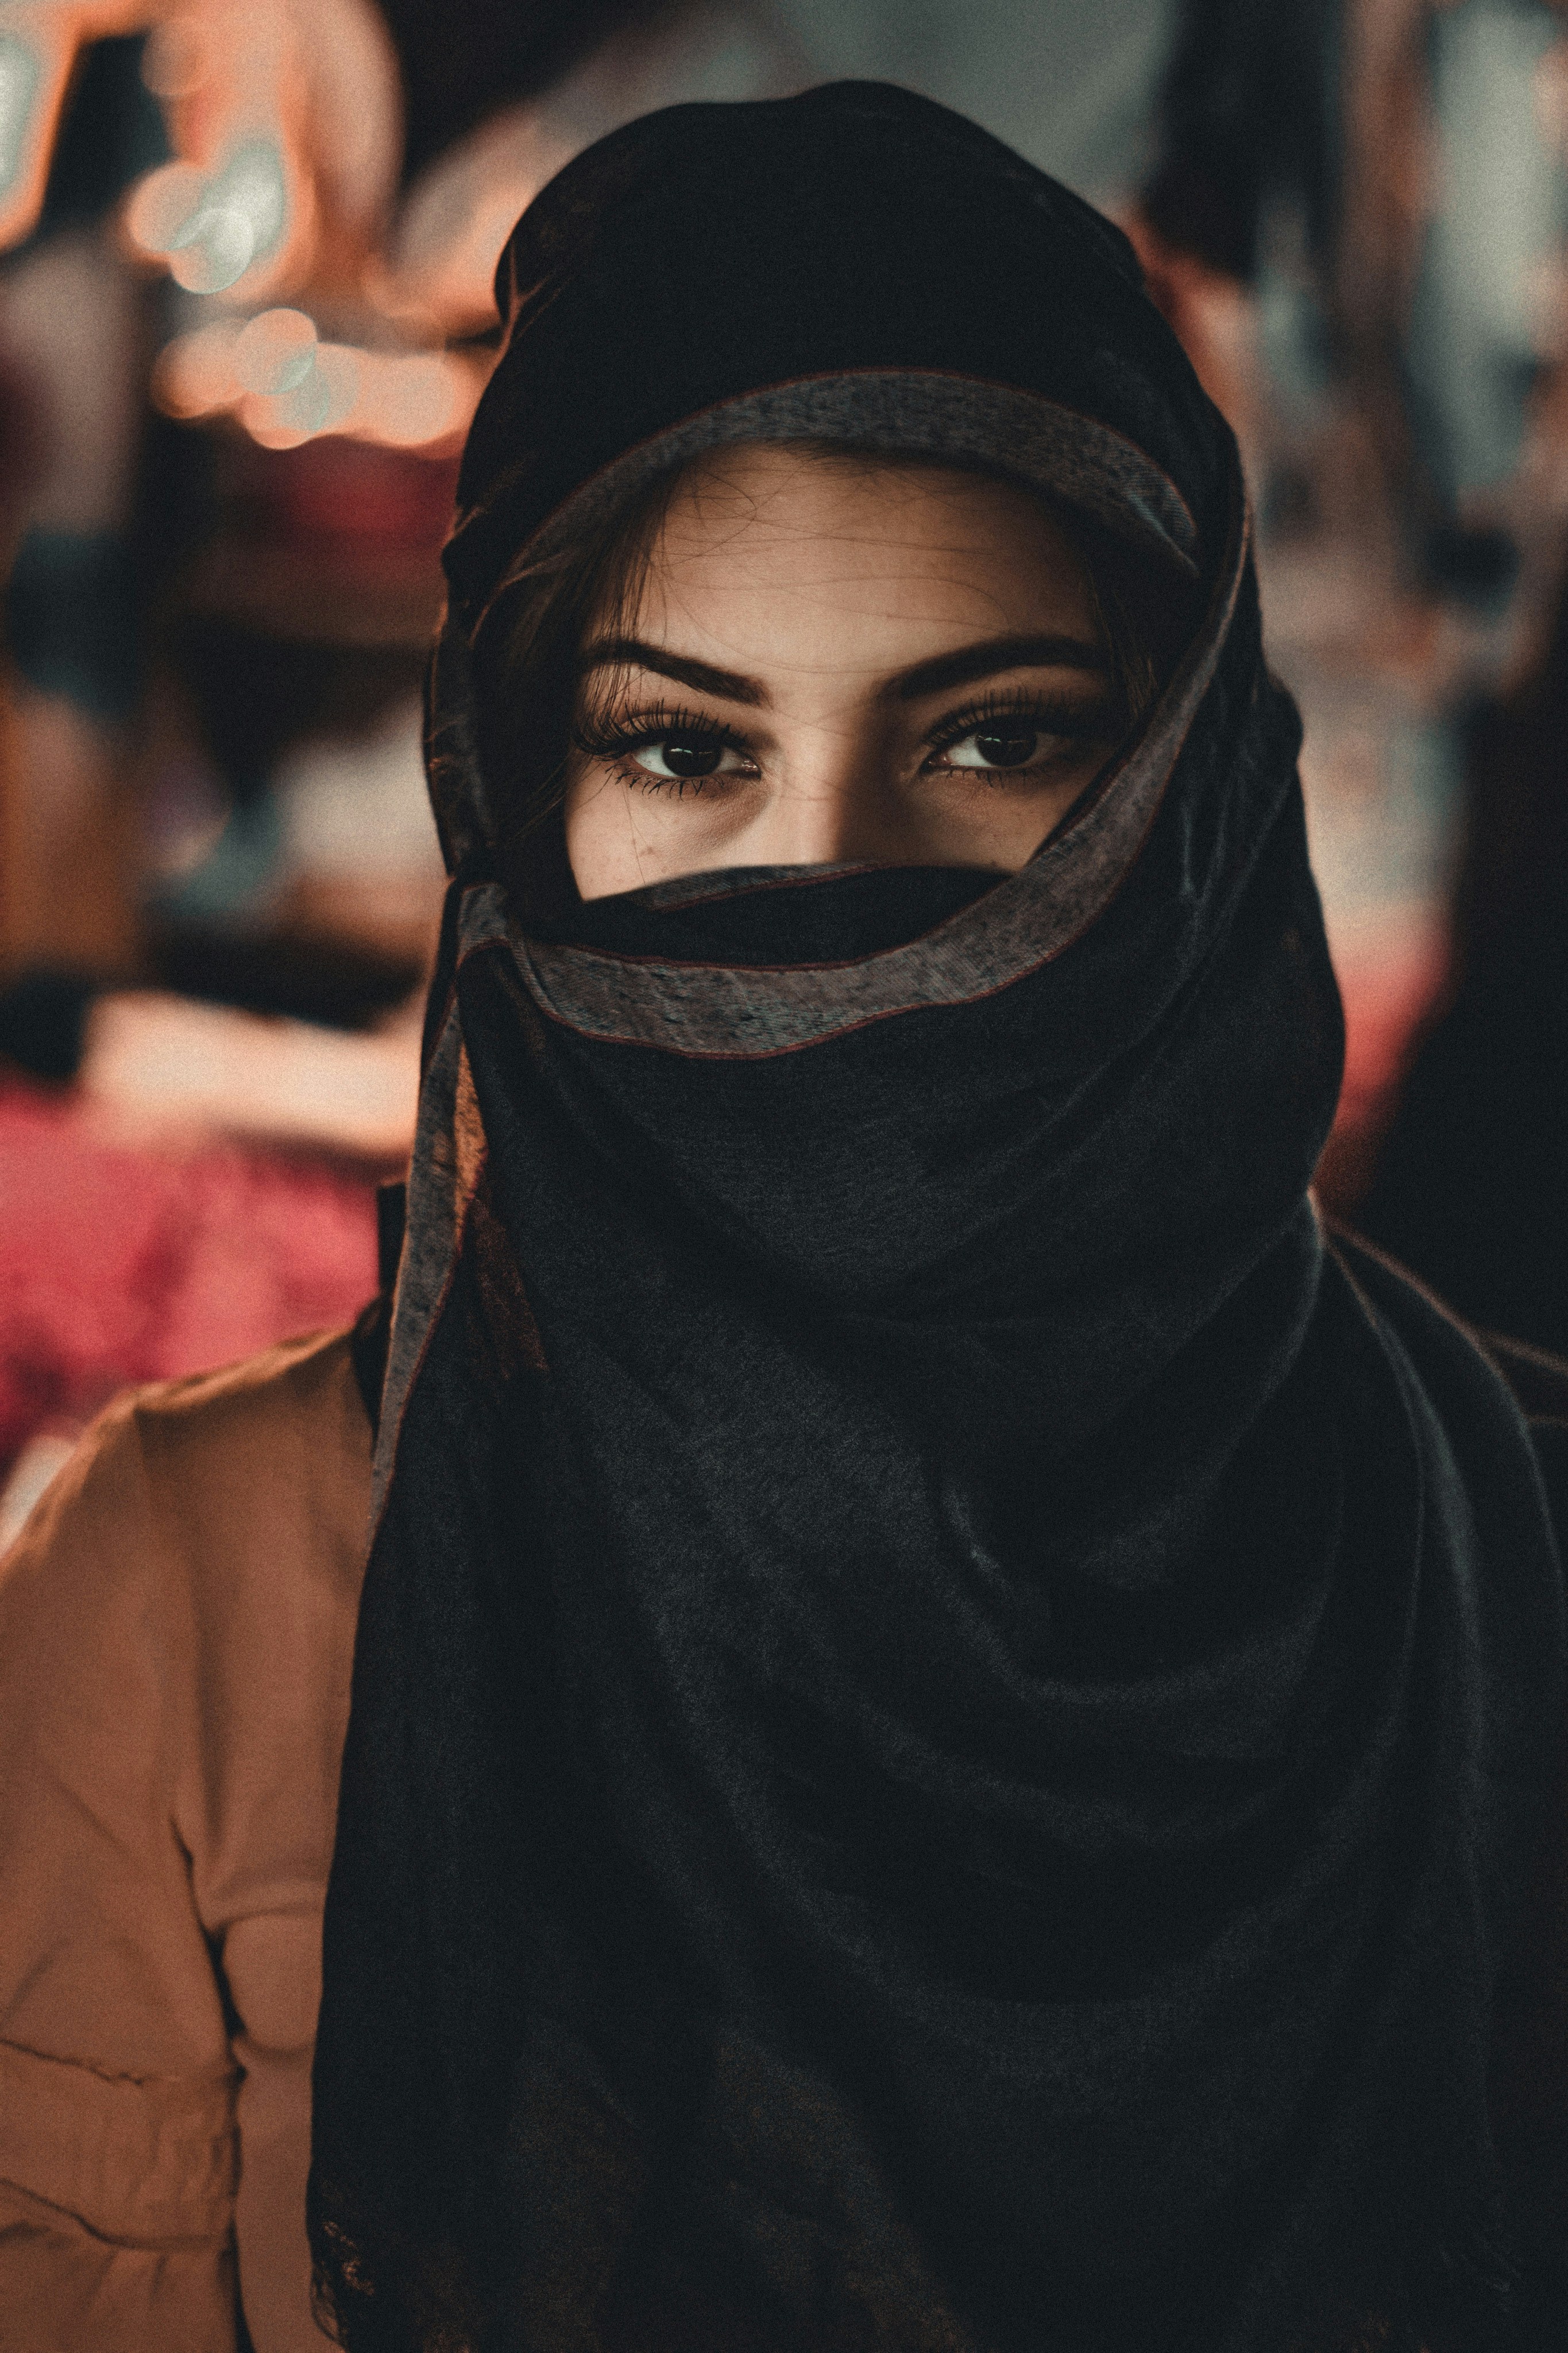 500+ Muslim Girl Pictures HD Download Free Images on Unsplash image photo